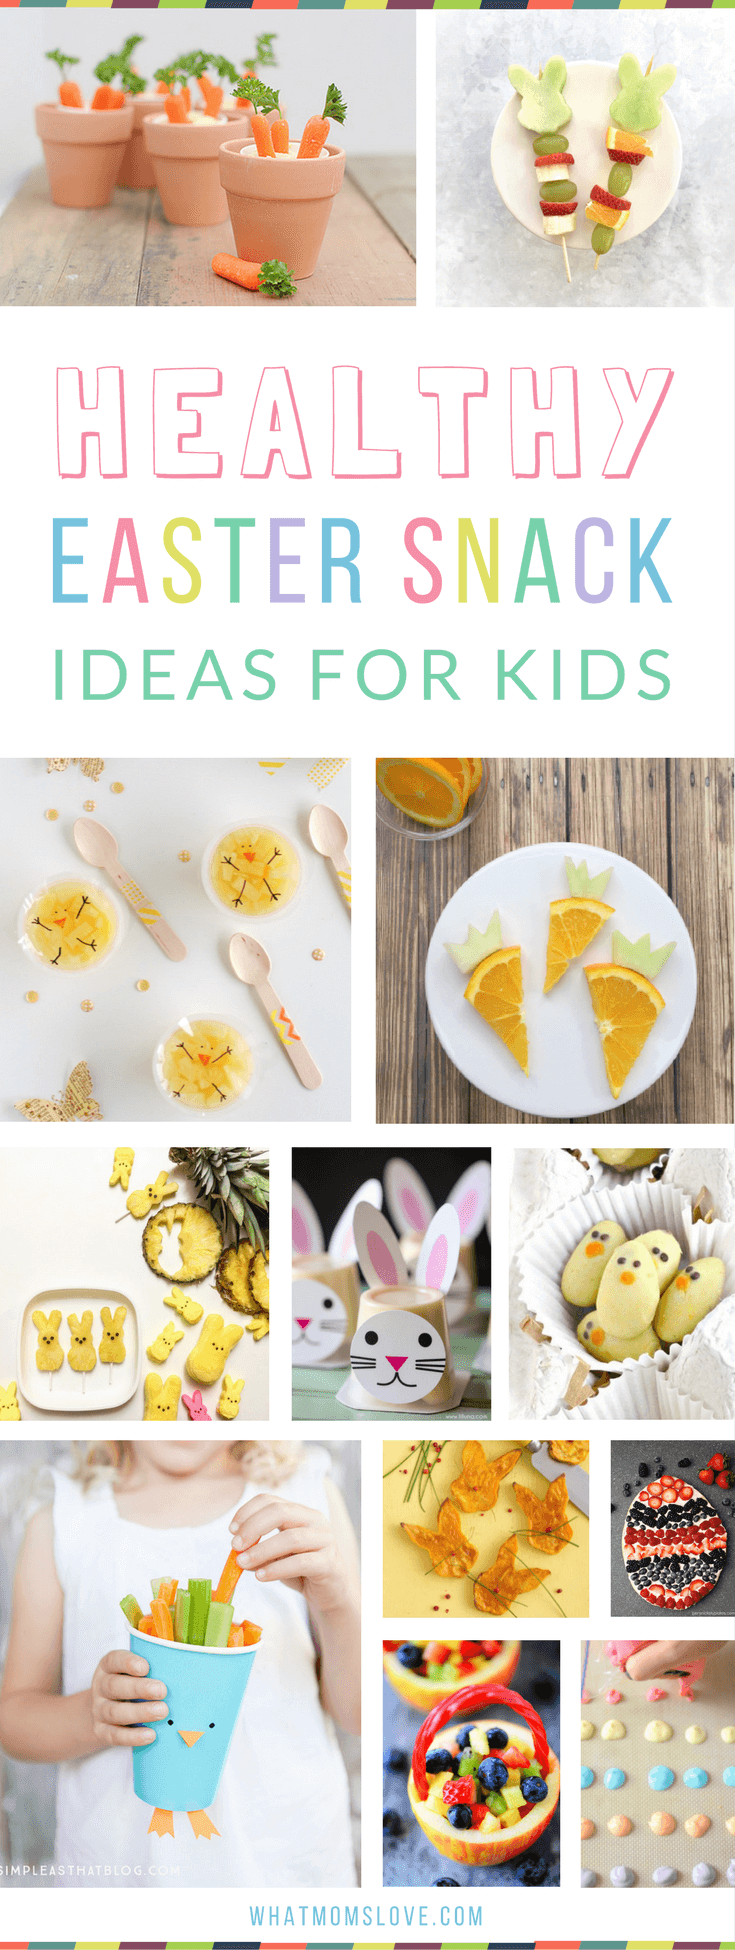 Healthy Easter Snack Ideas for Kids | Fun snacks that are great for school or for your party, perfect for toddlers, preschoolers and big kids too! Super cute and creative ideas that are easy to make!